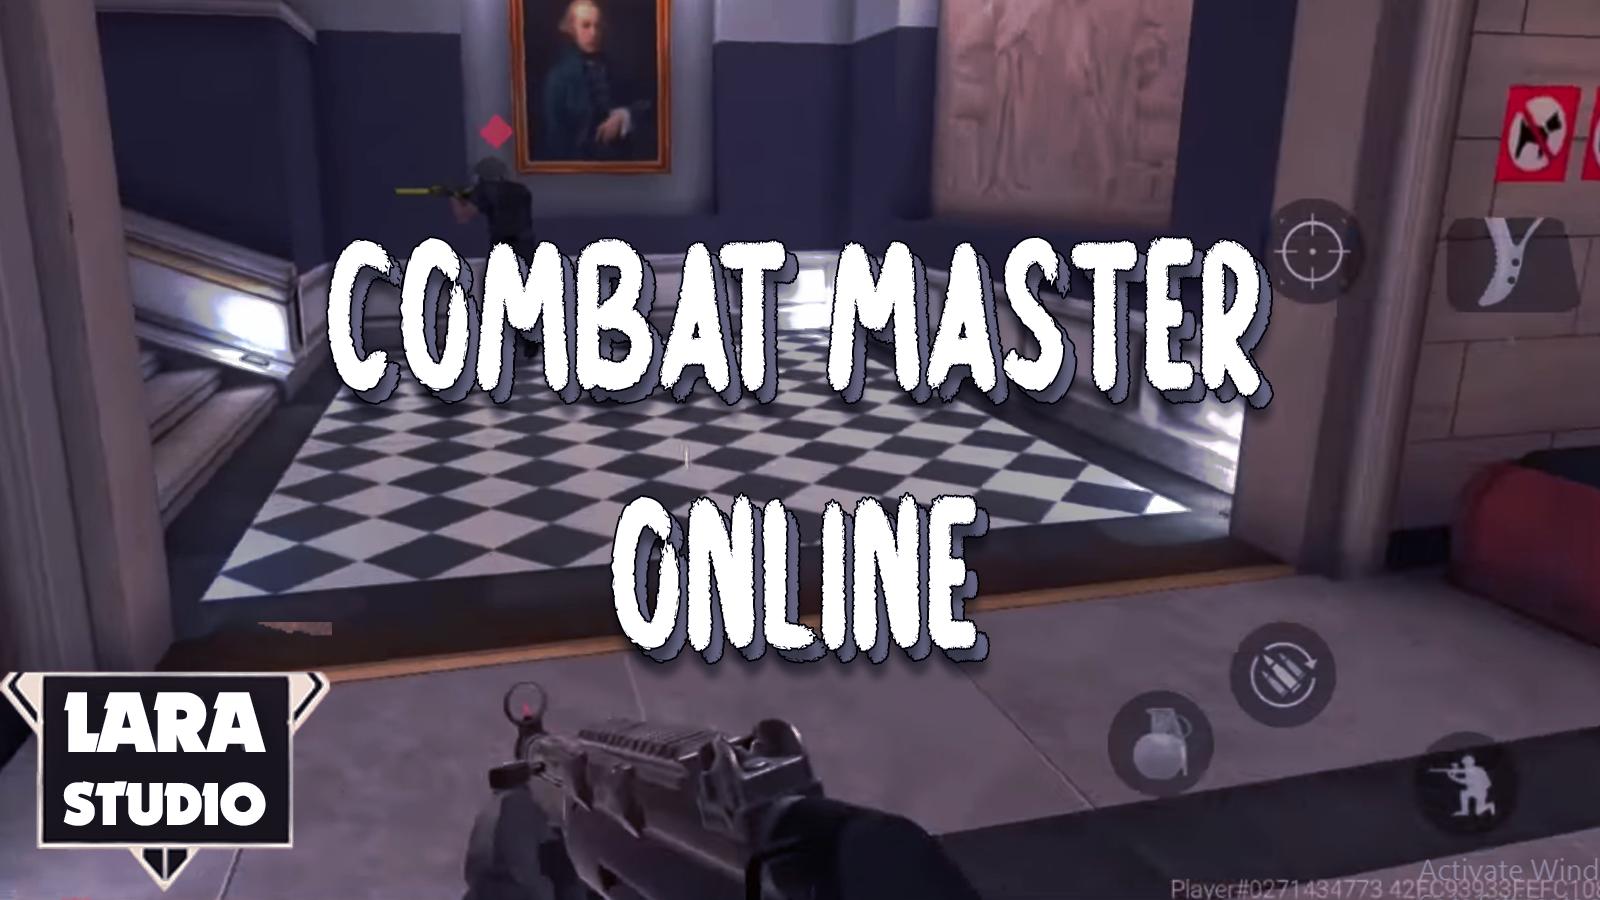 Combat master play market. Multiplayer Master. Combat Master PC. Combat Master mobile. Топ обои комбат мастер ФПС.